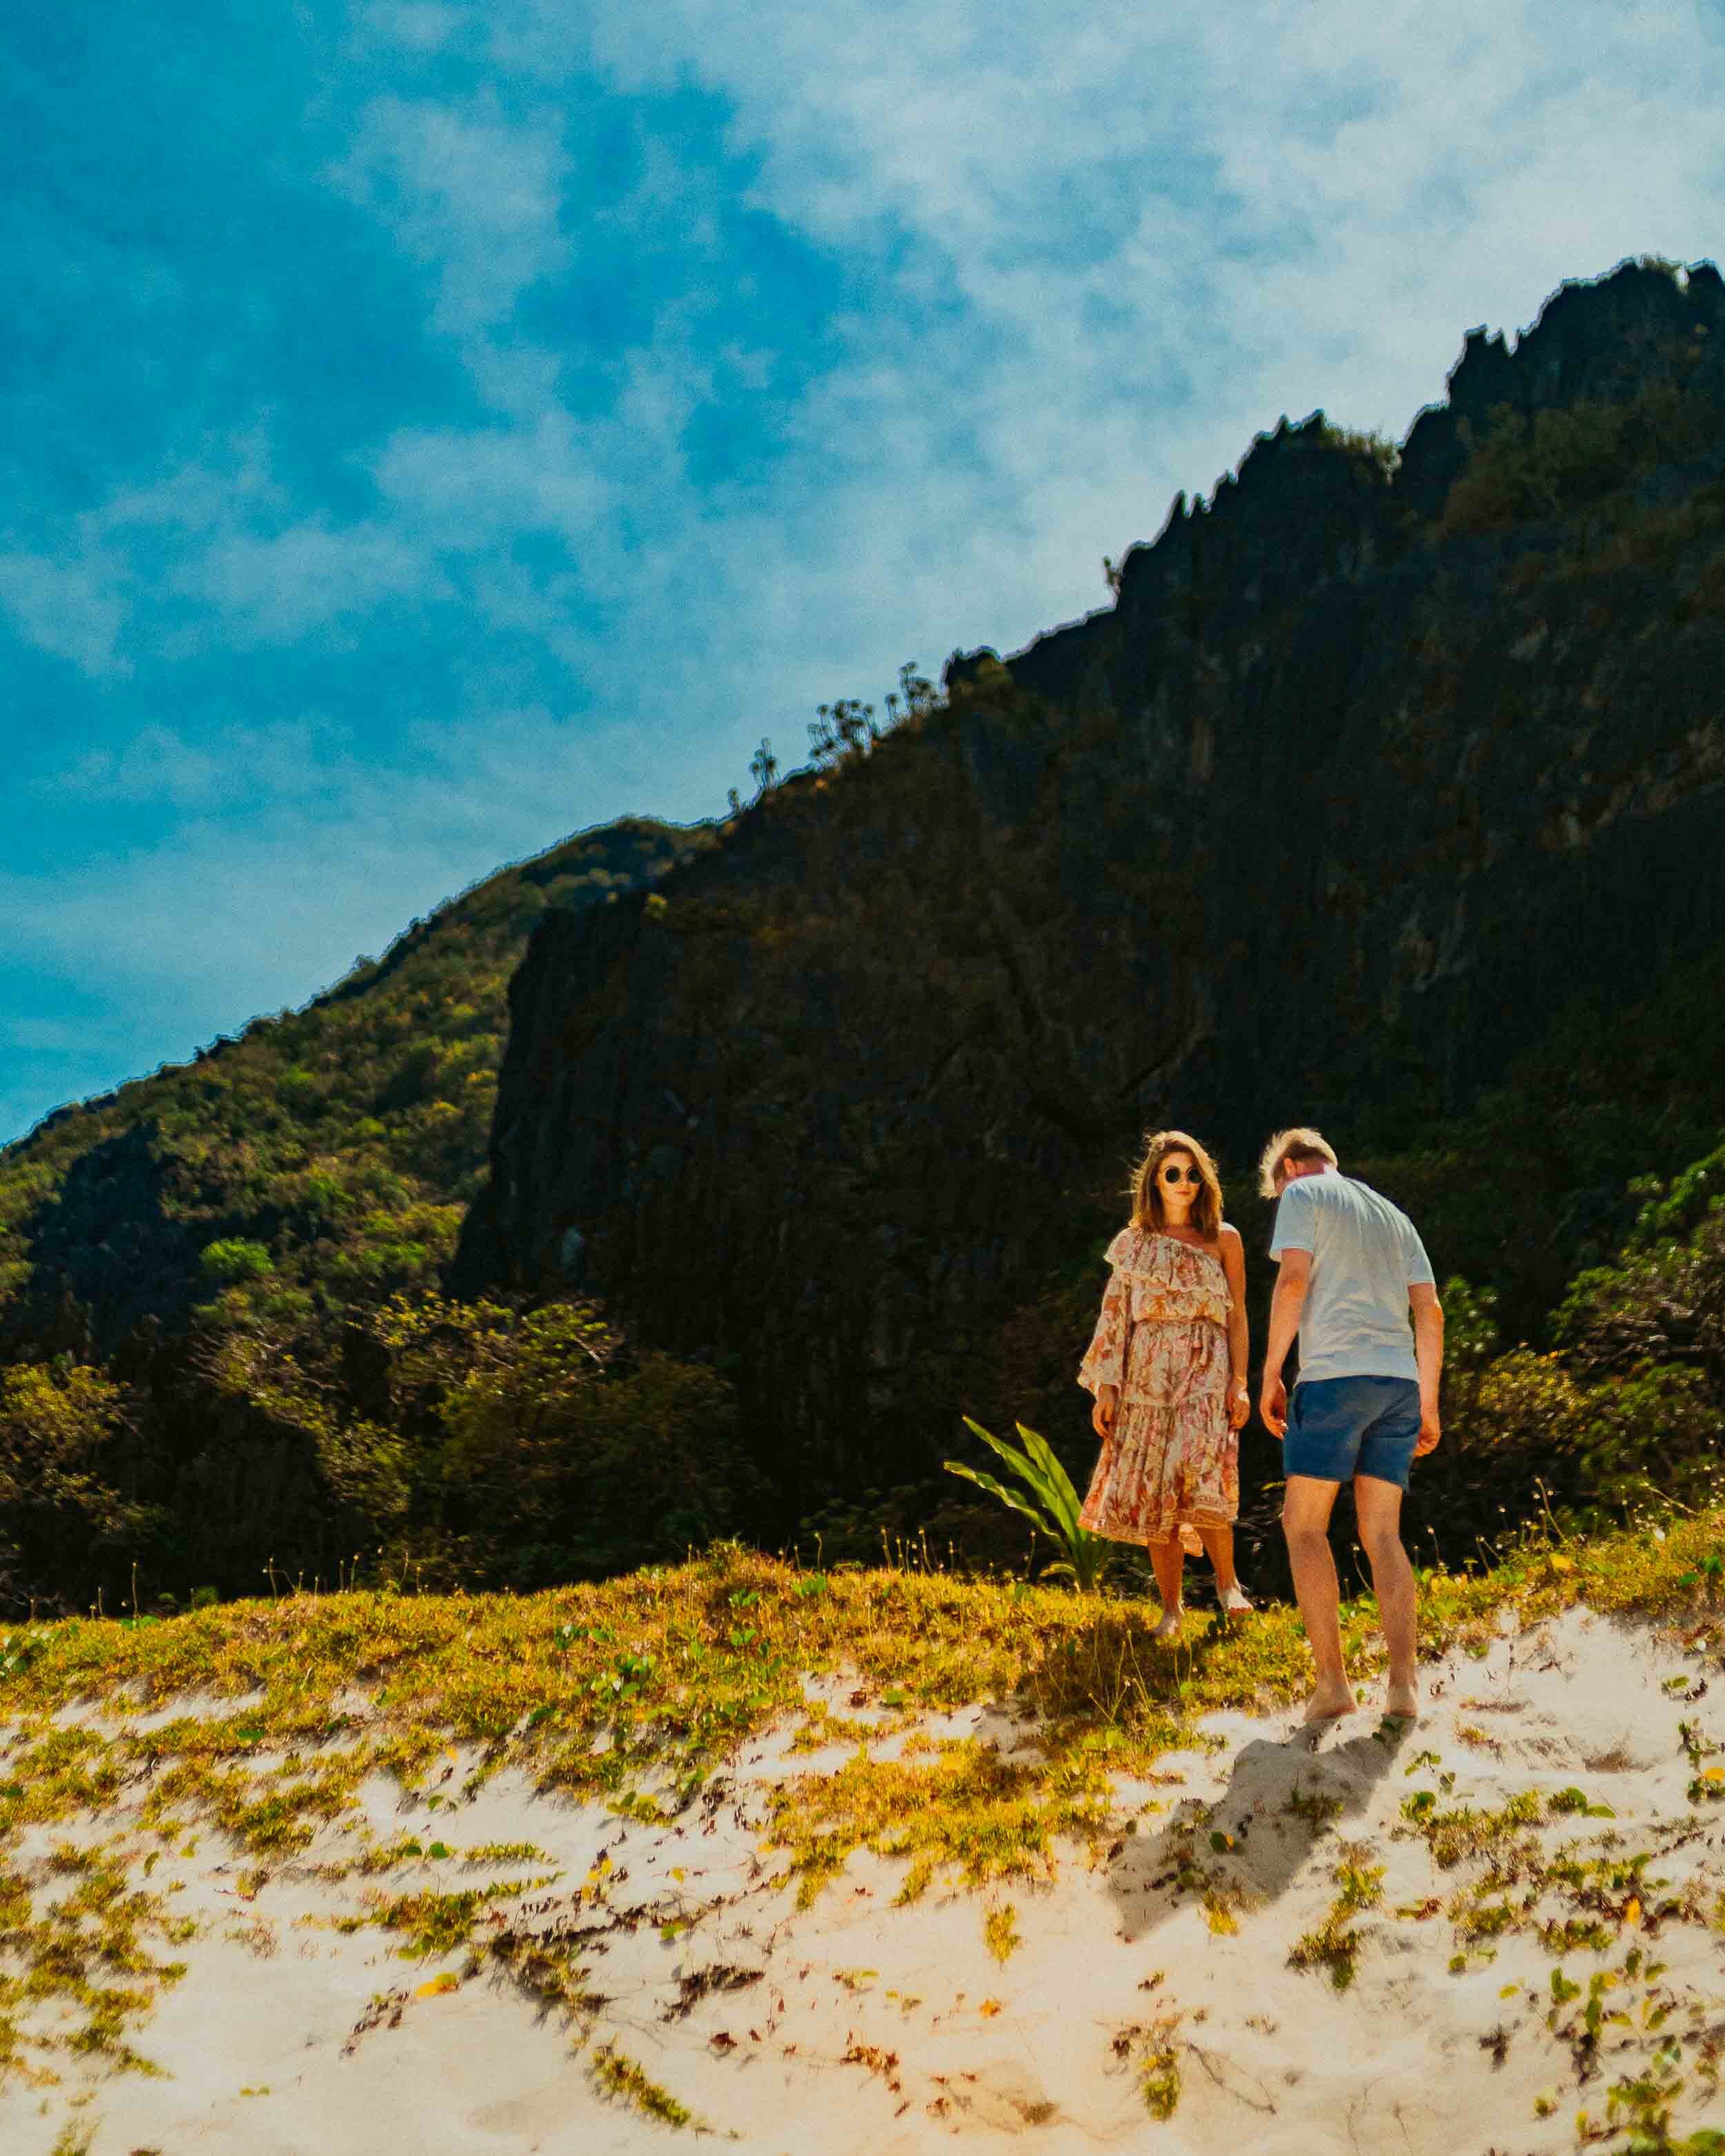 15 El Nido Philippines Couple Photography Honeymoon portraits in Palawan, March 2020. Travel couple photography in Southeast Asia x @hejguj.jpg